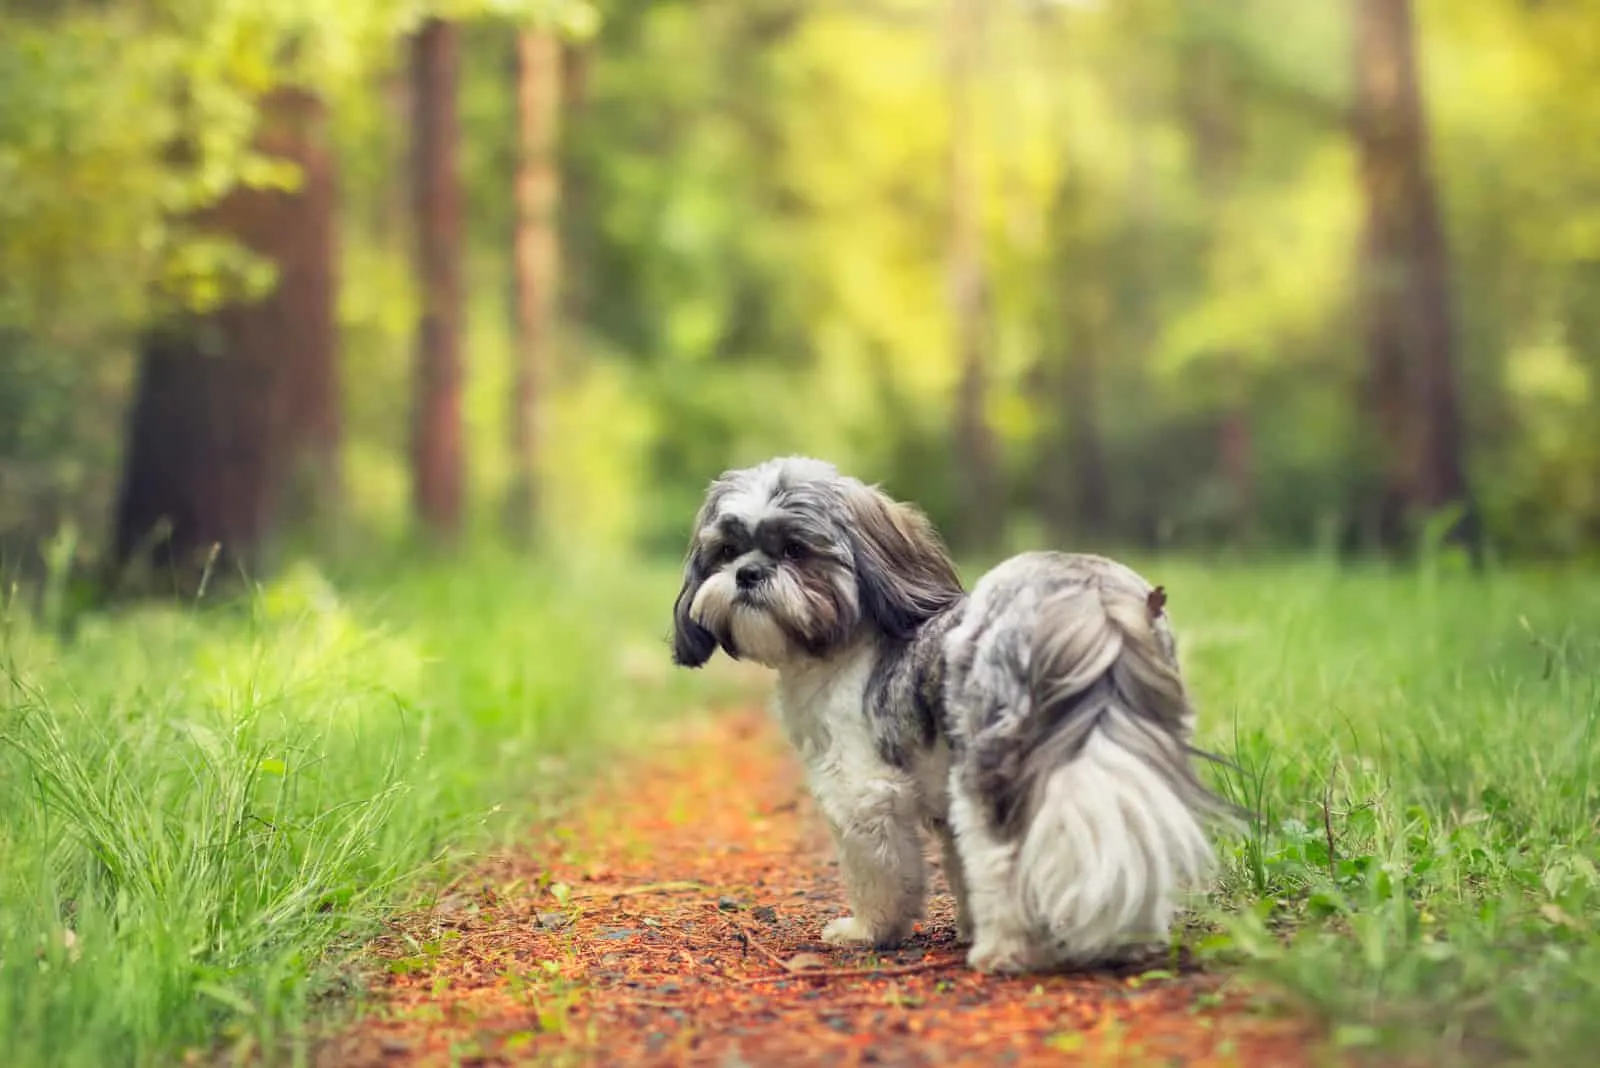 Shih tzu dog standing in a forest